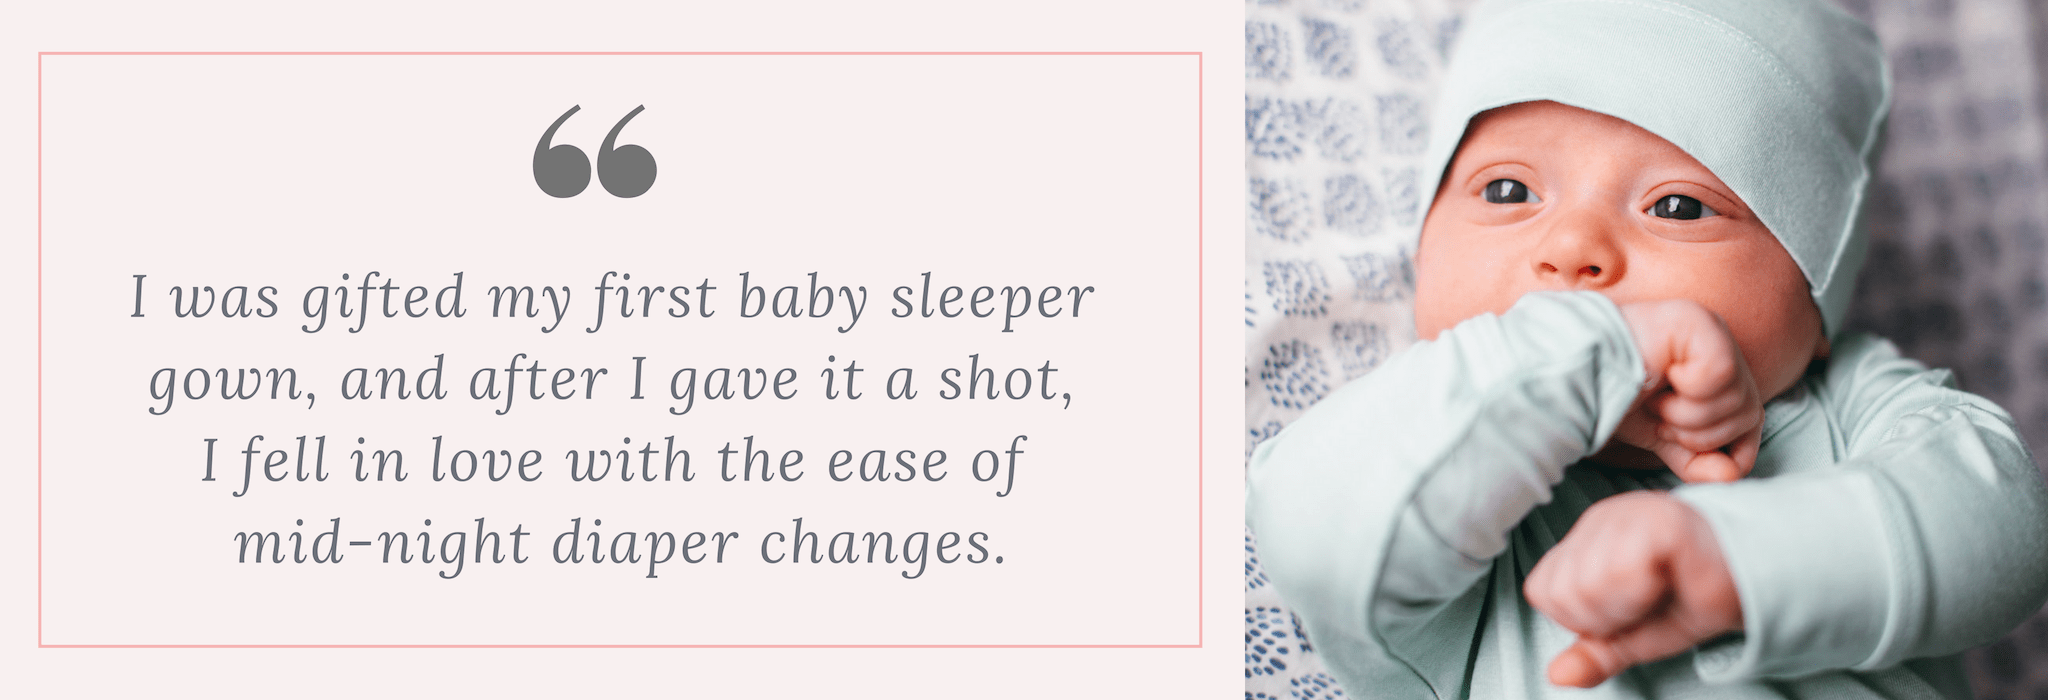 tara-quote-about-baby-sleeper-gowns